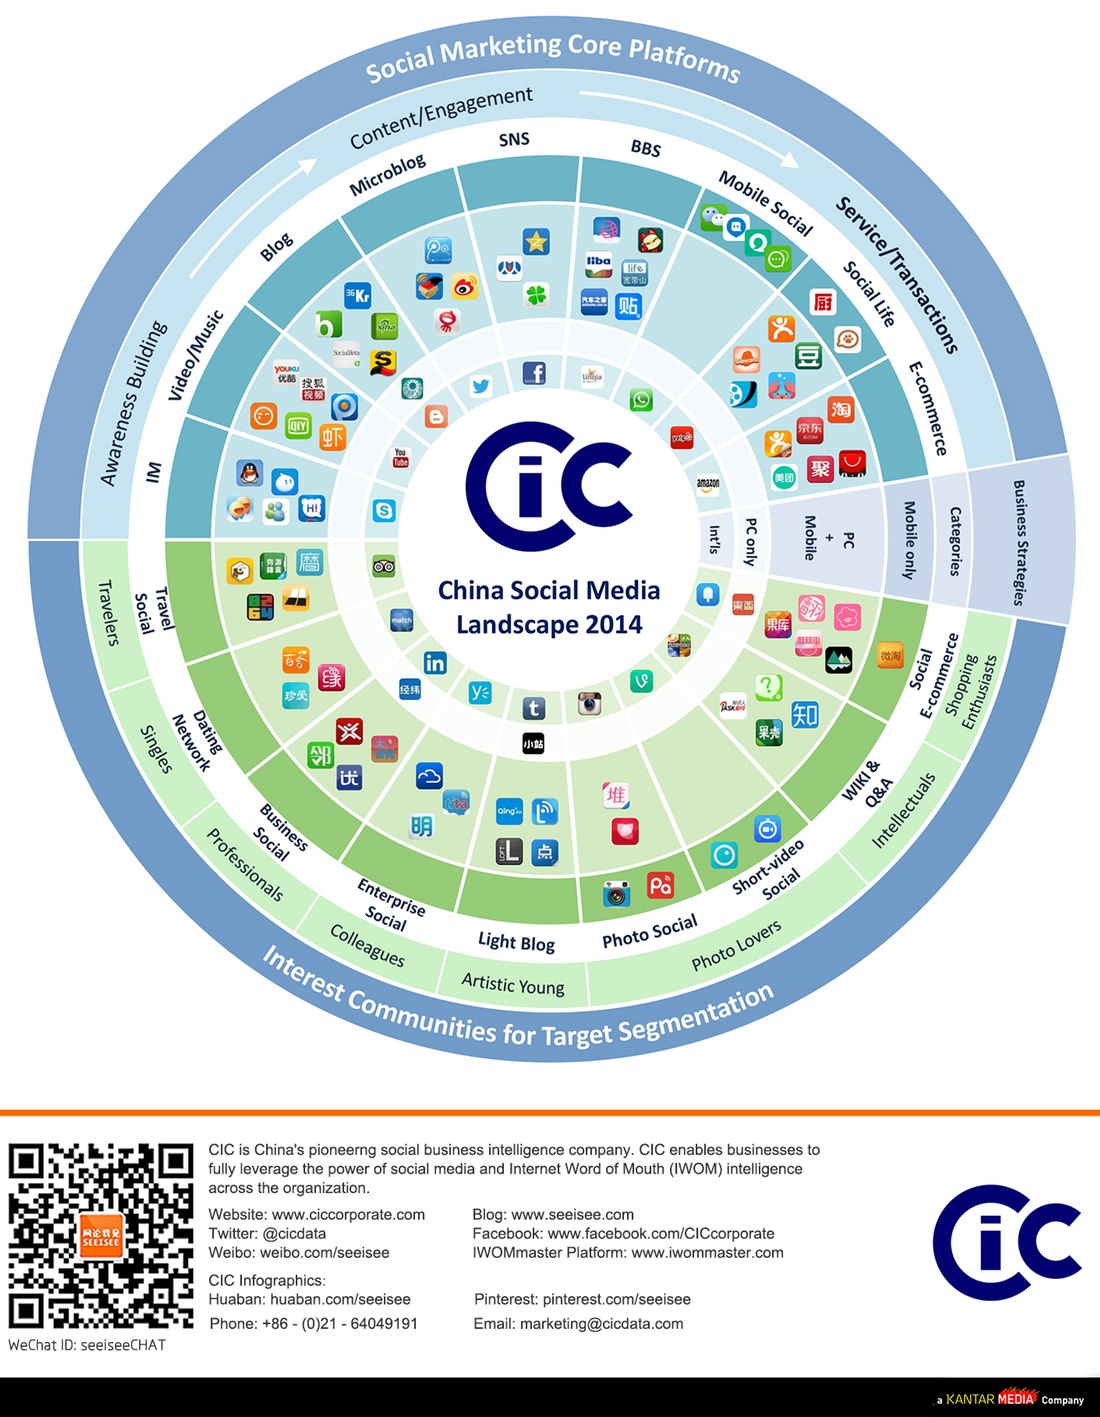 China’s social media landscape in 2014 - INFOGRAPHIC